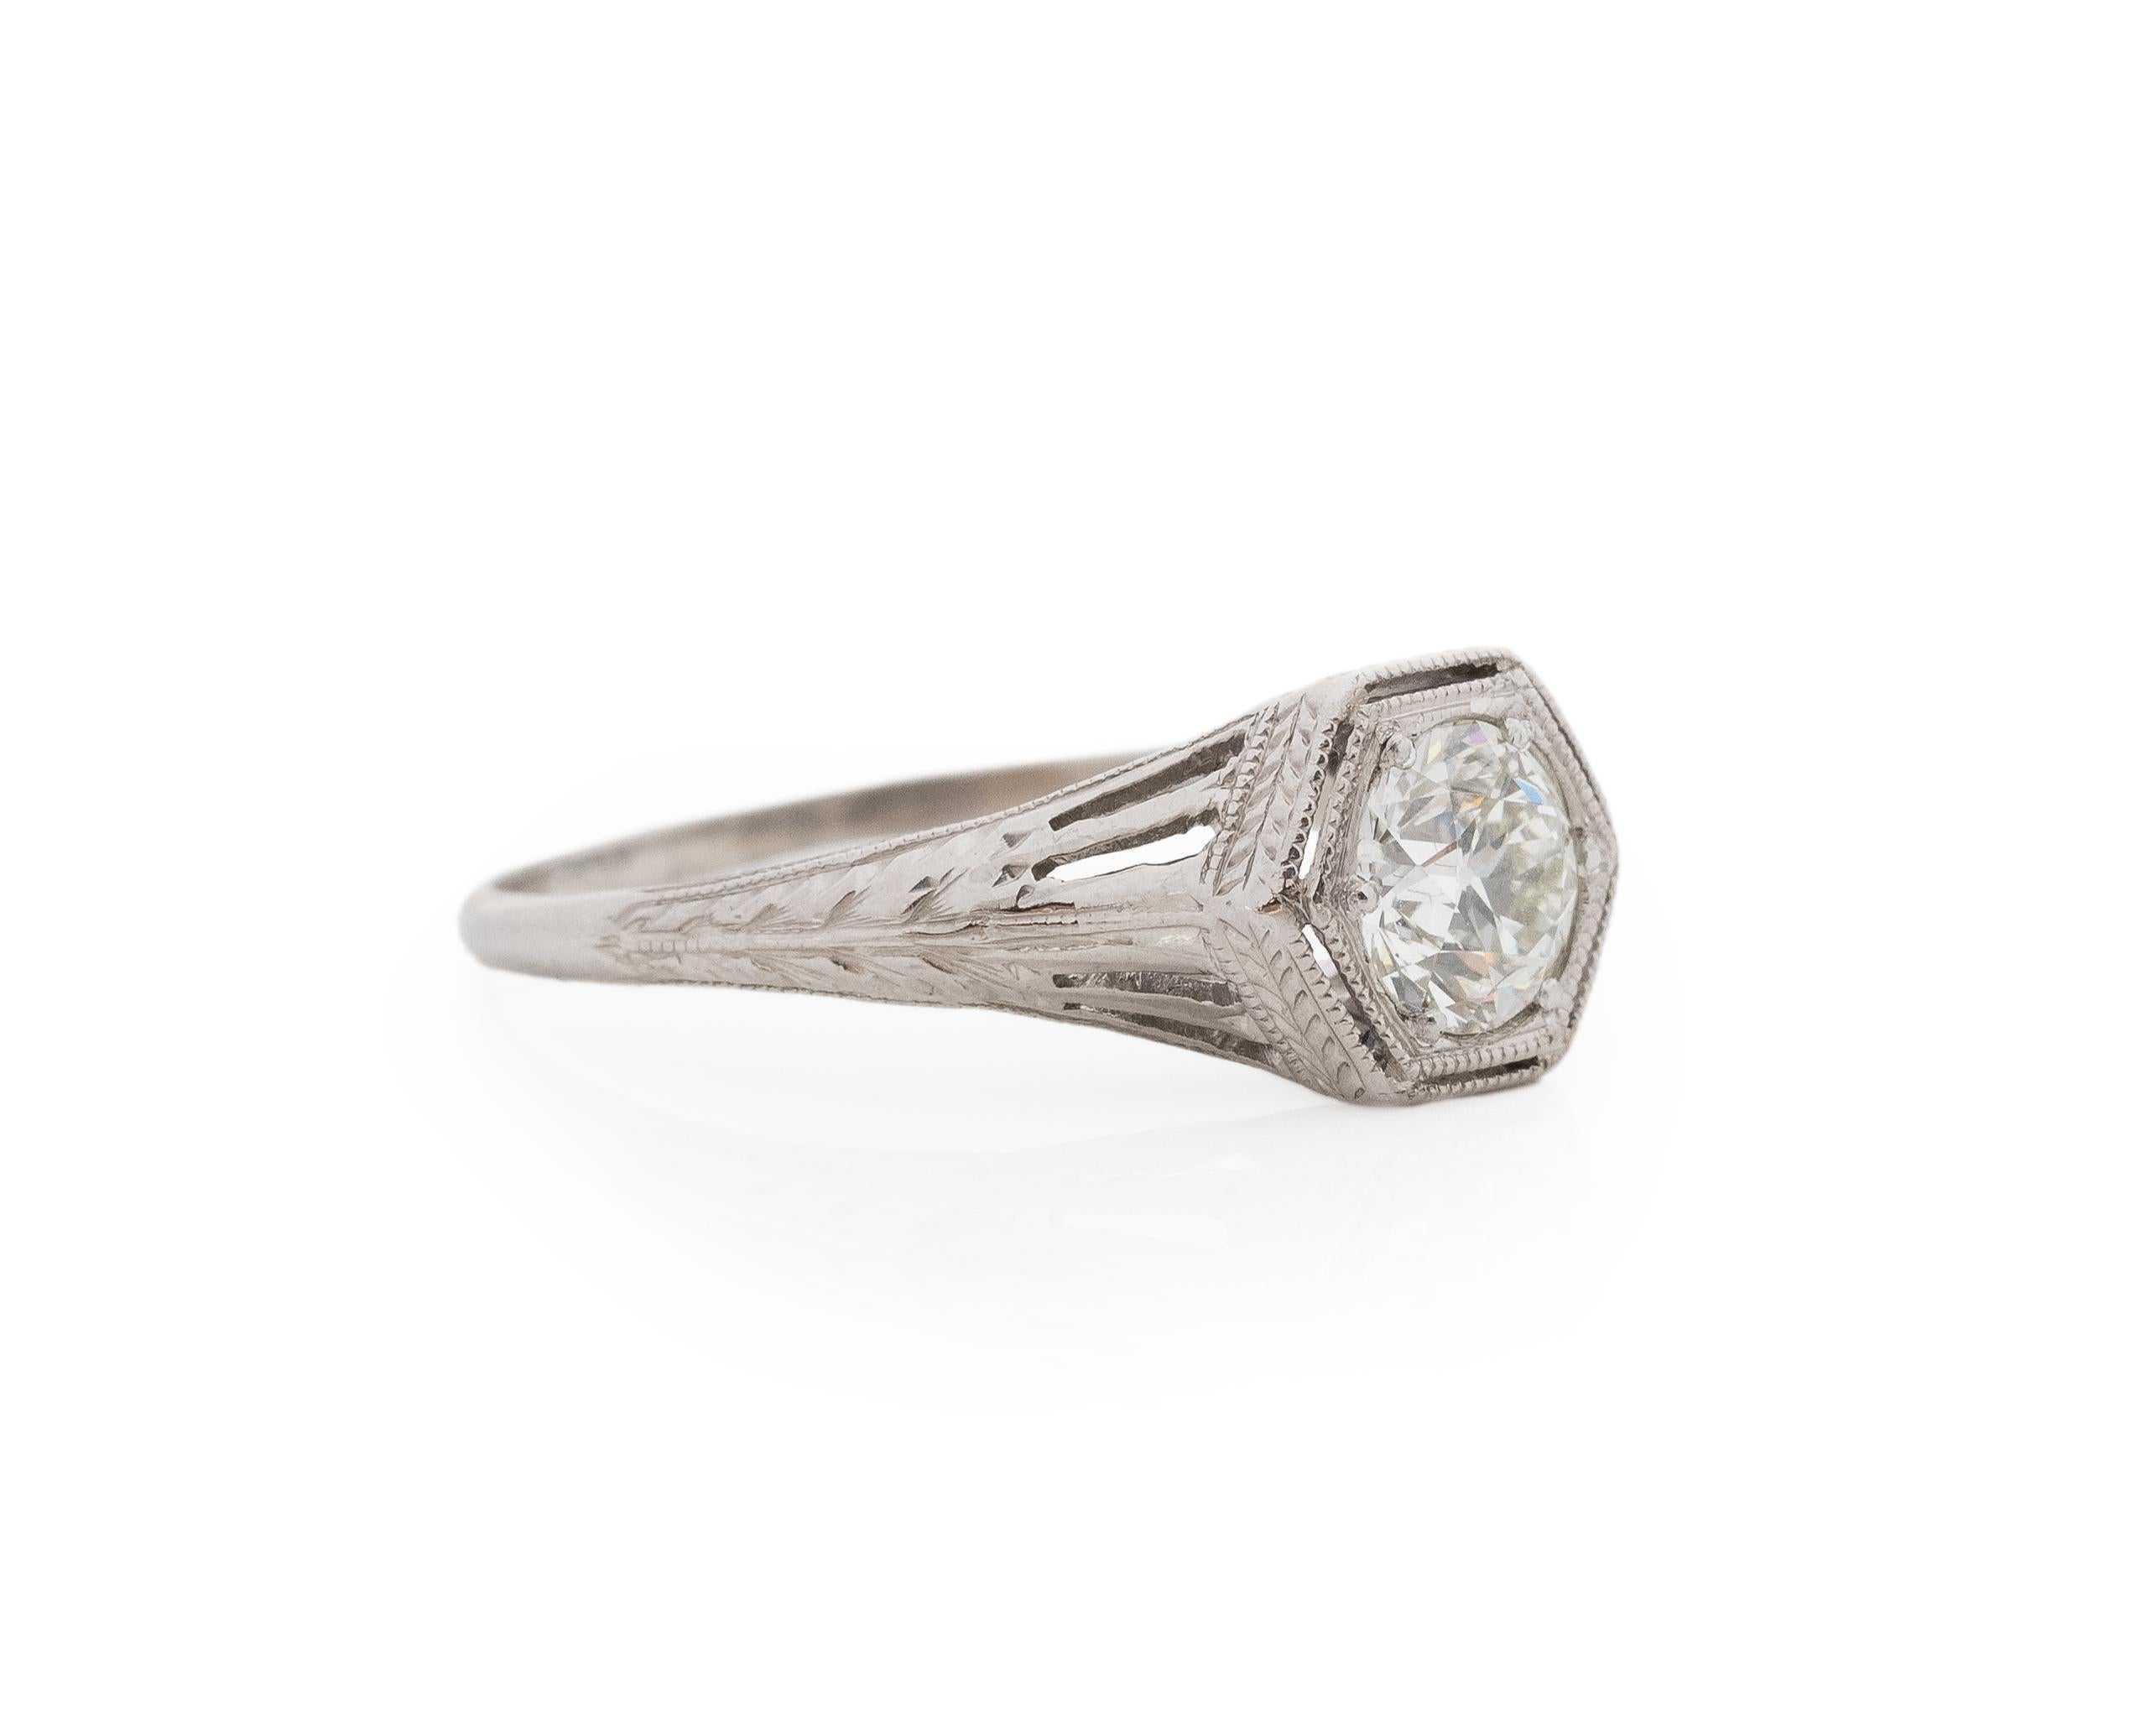 Year: 1920s

Item Details:
Ring Size: 7.5
Metal Type: Platinum [Hallmarked, and Tested]
Weight: 2.8. grams

Center Diamond Details:

GIA Report#:7235080688
Weight: .82ct total weight
Cut: Old European brilliant
Color: J
Clarity: SI1
Type: